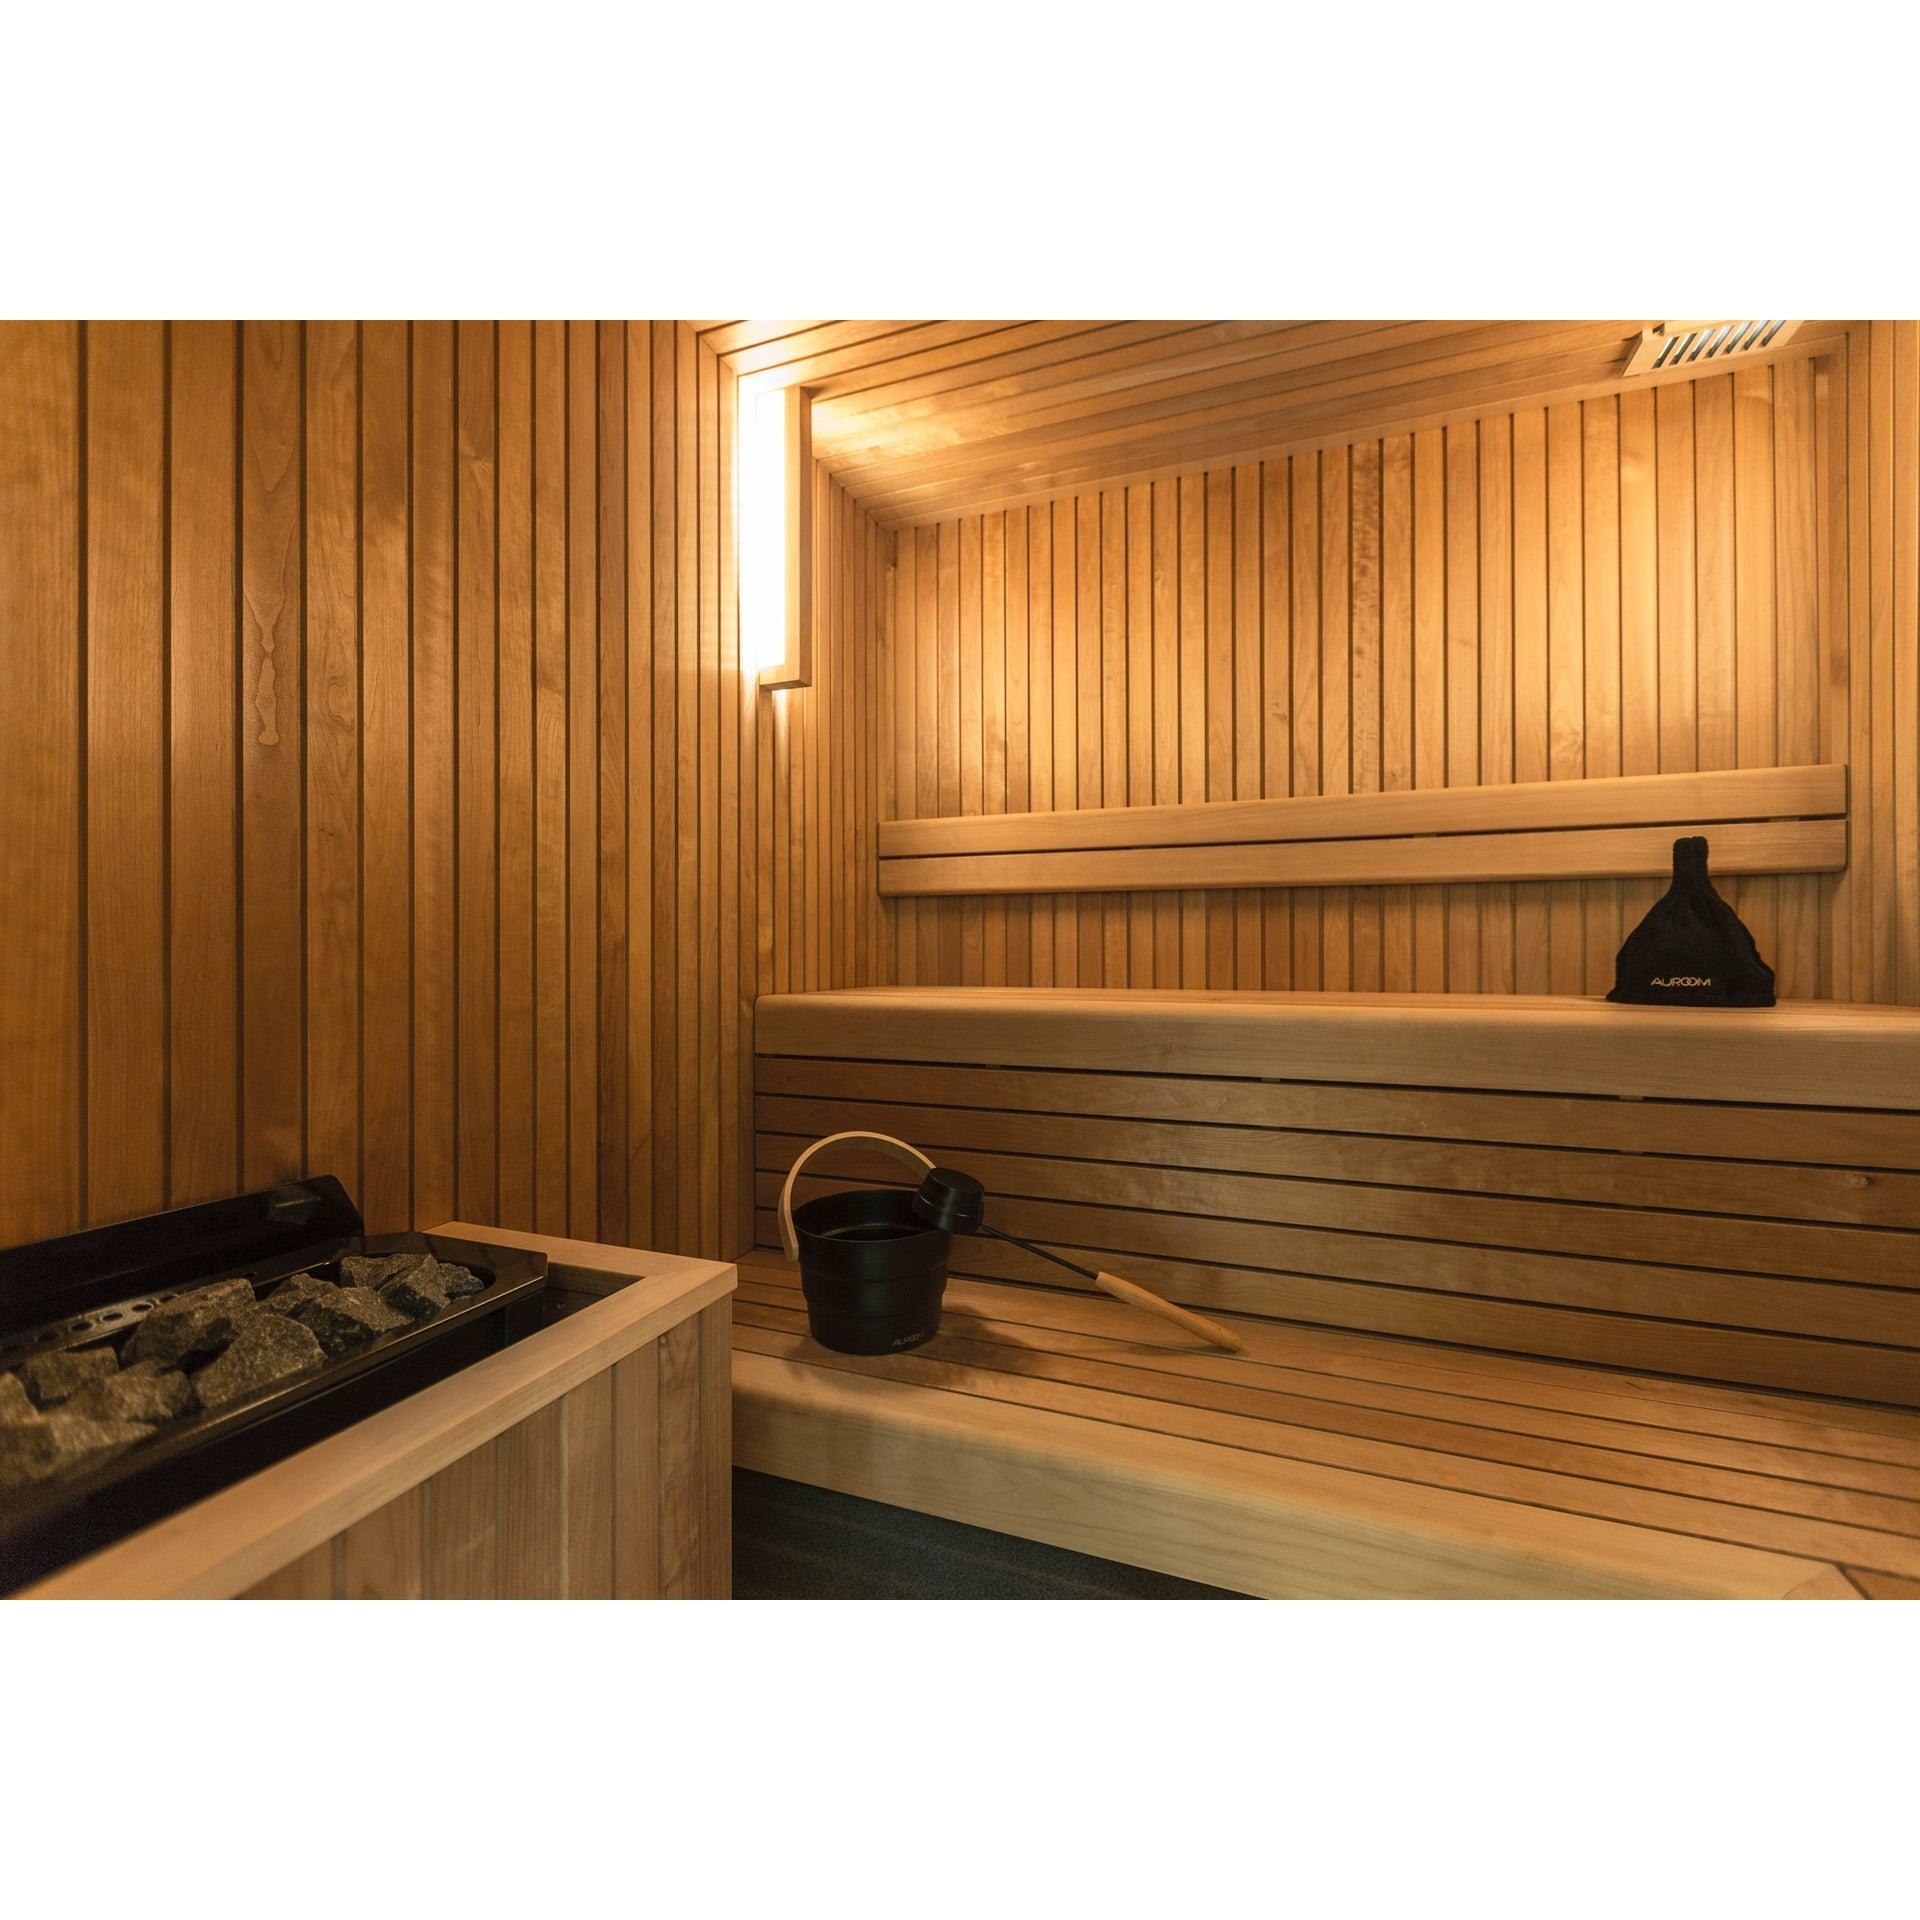 Familia Indoor Home Sauna Kit - Purely Relaxation